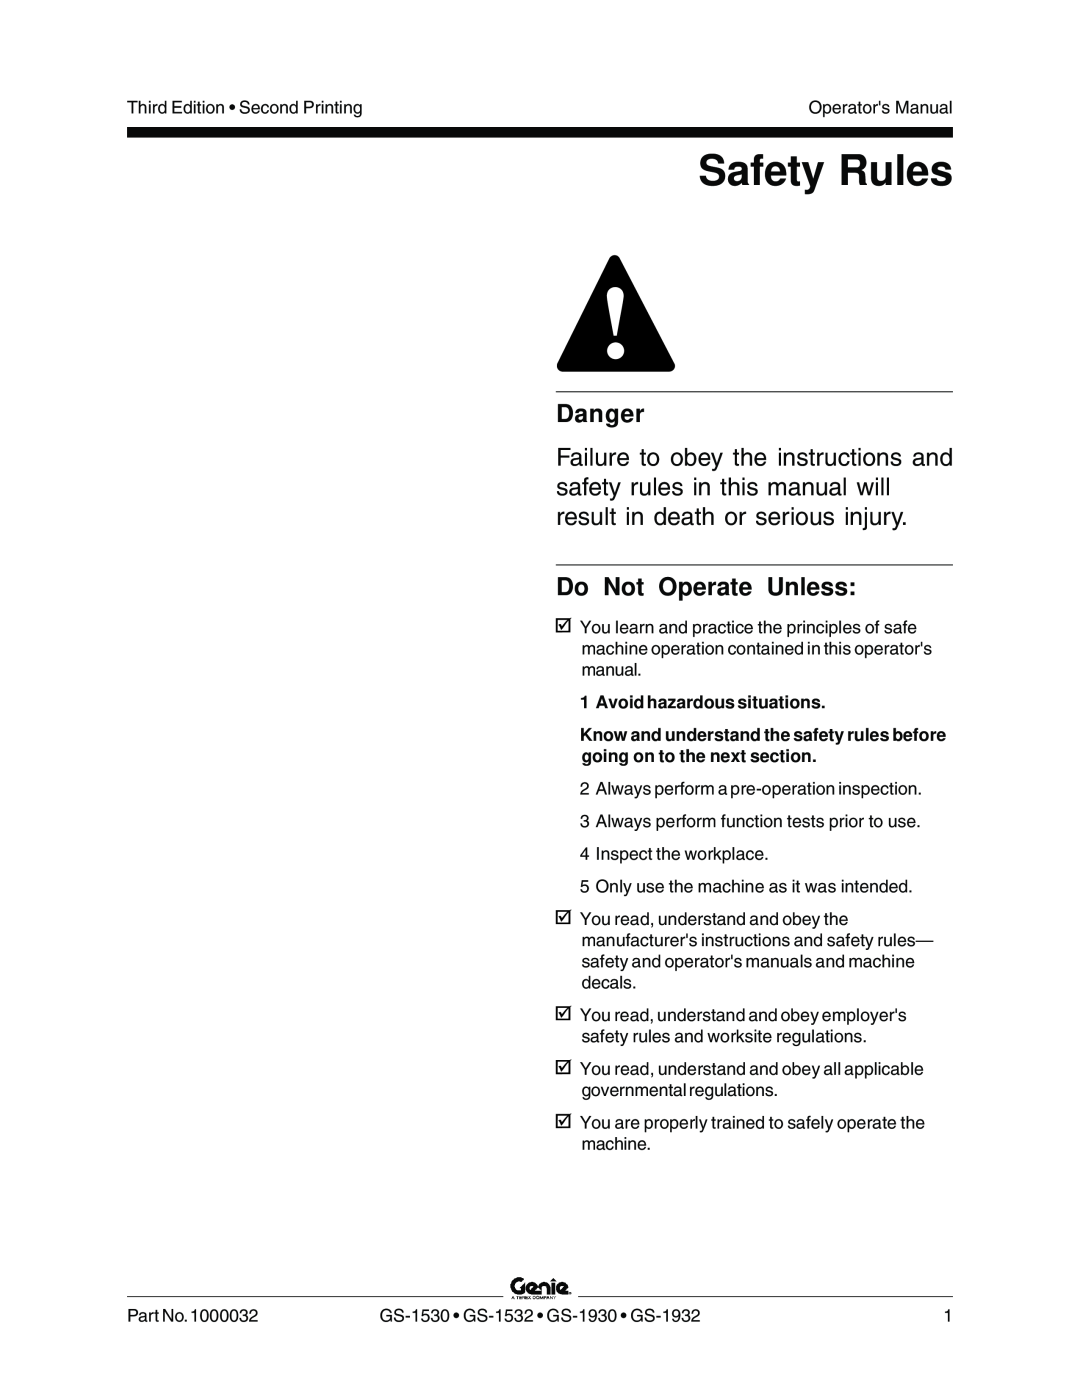 Genie GS-1532, GS-1930, CE, GS-1530, GS-1932 manual Safety Rules, Danger, Do Not Operate Unless, Avoid hazardous situations 